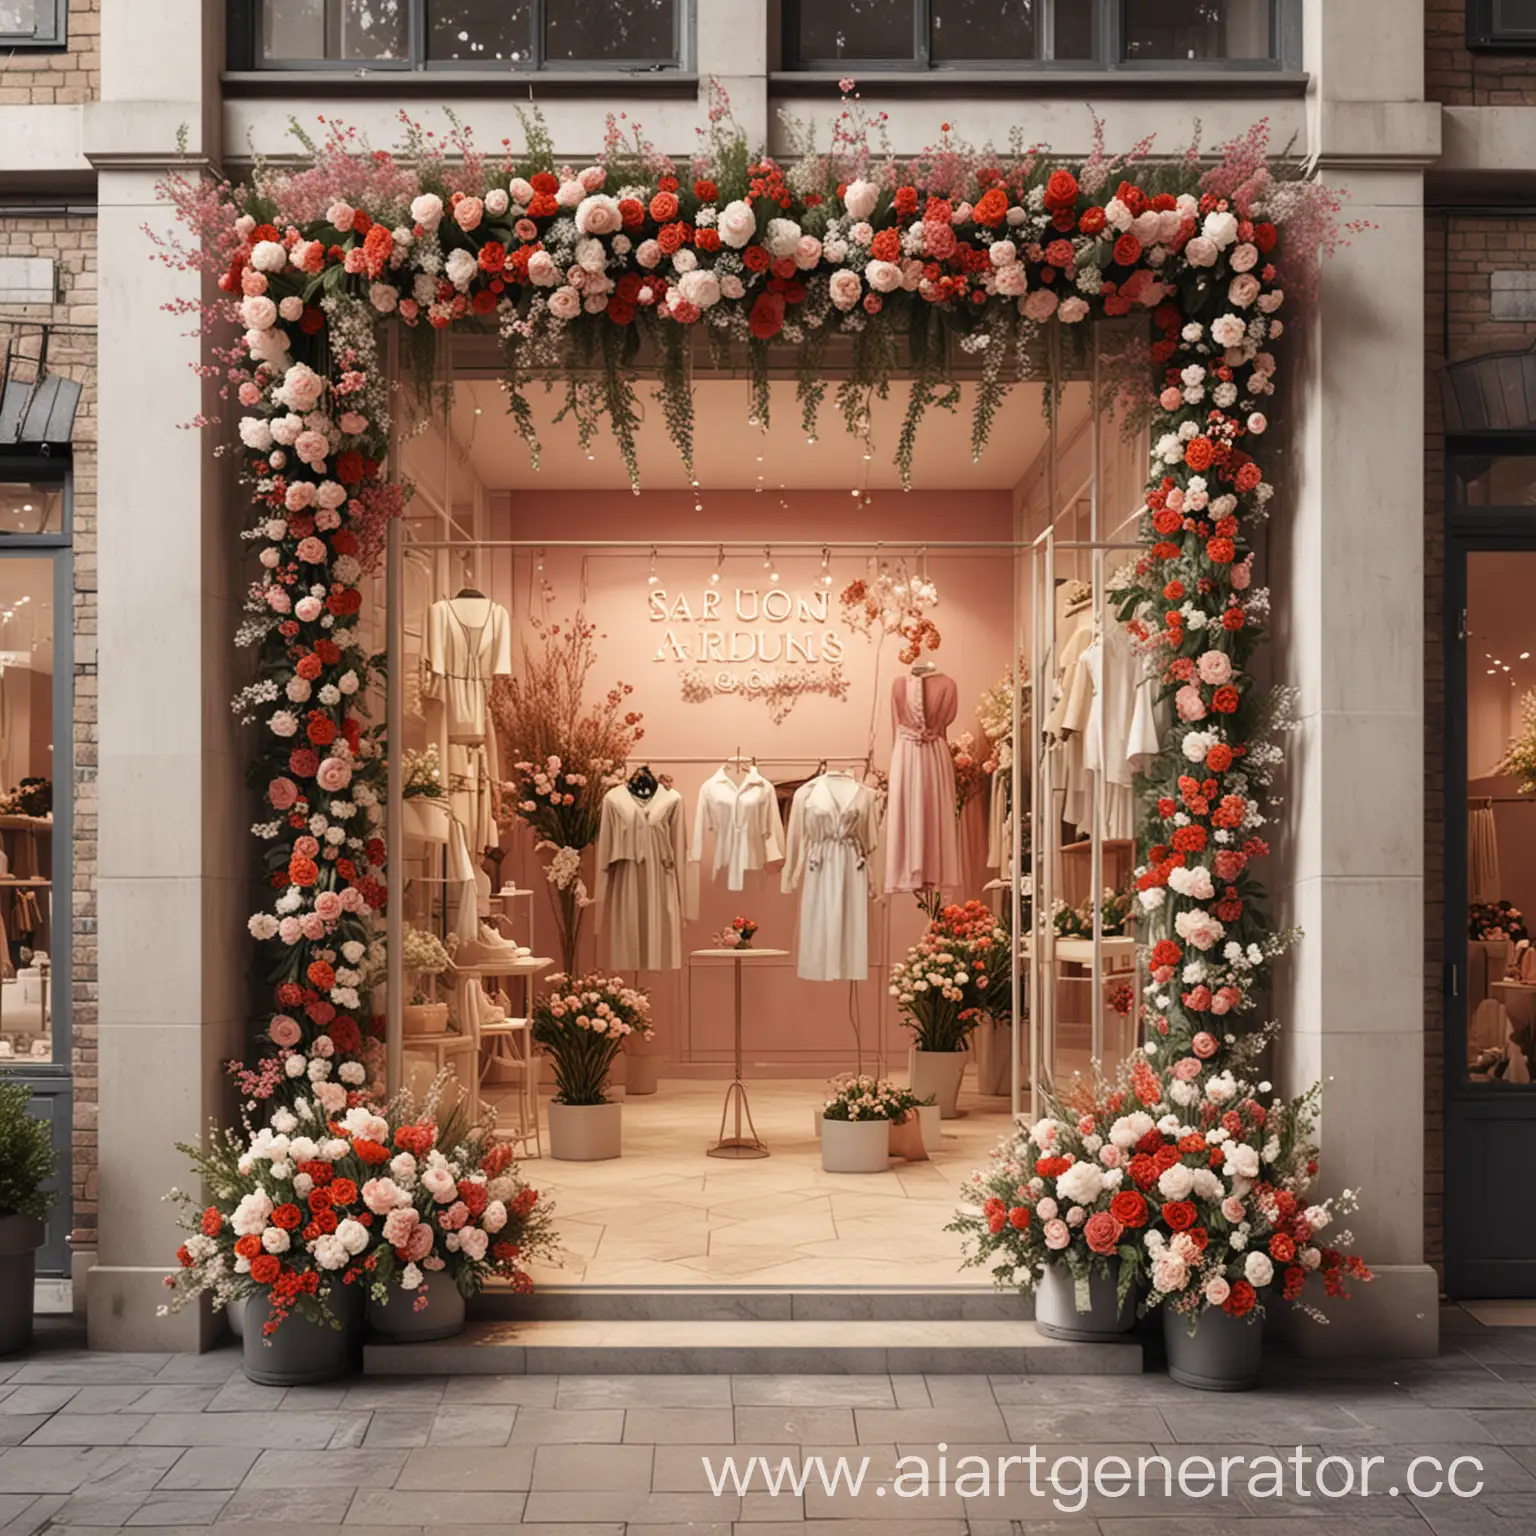 Fashion-Store-Concept-Design-with-Flower-Decorations